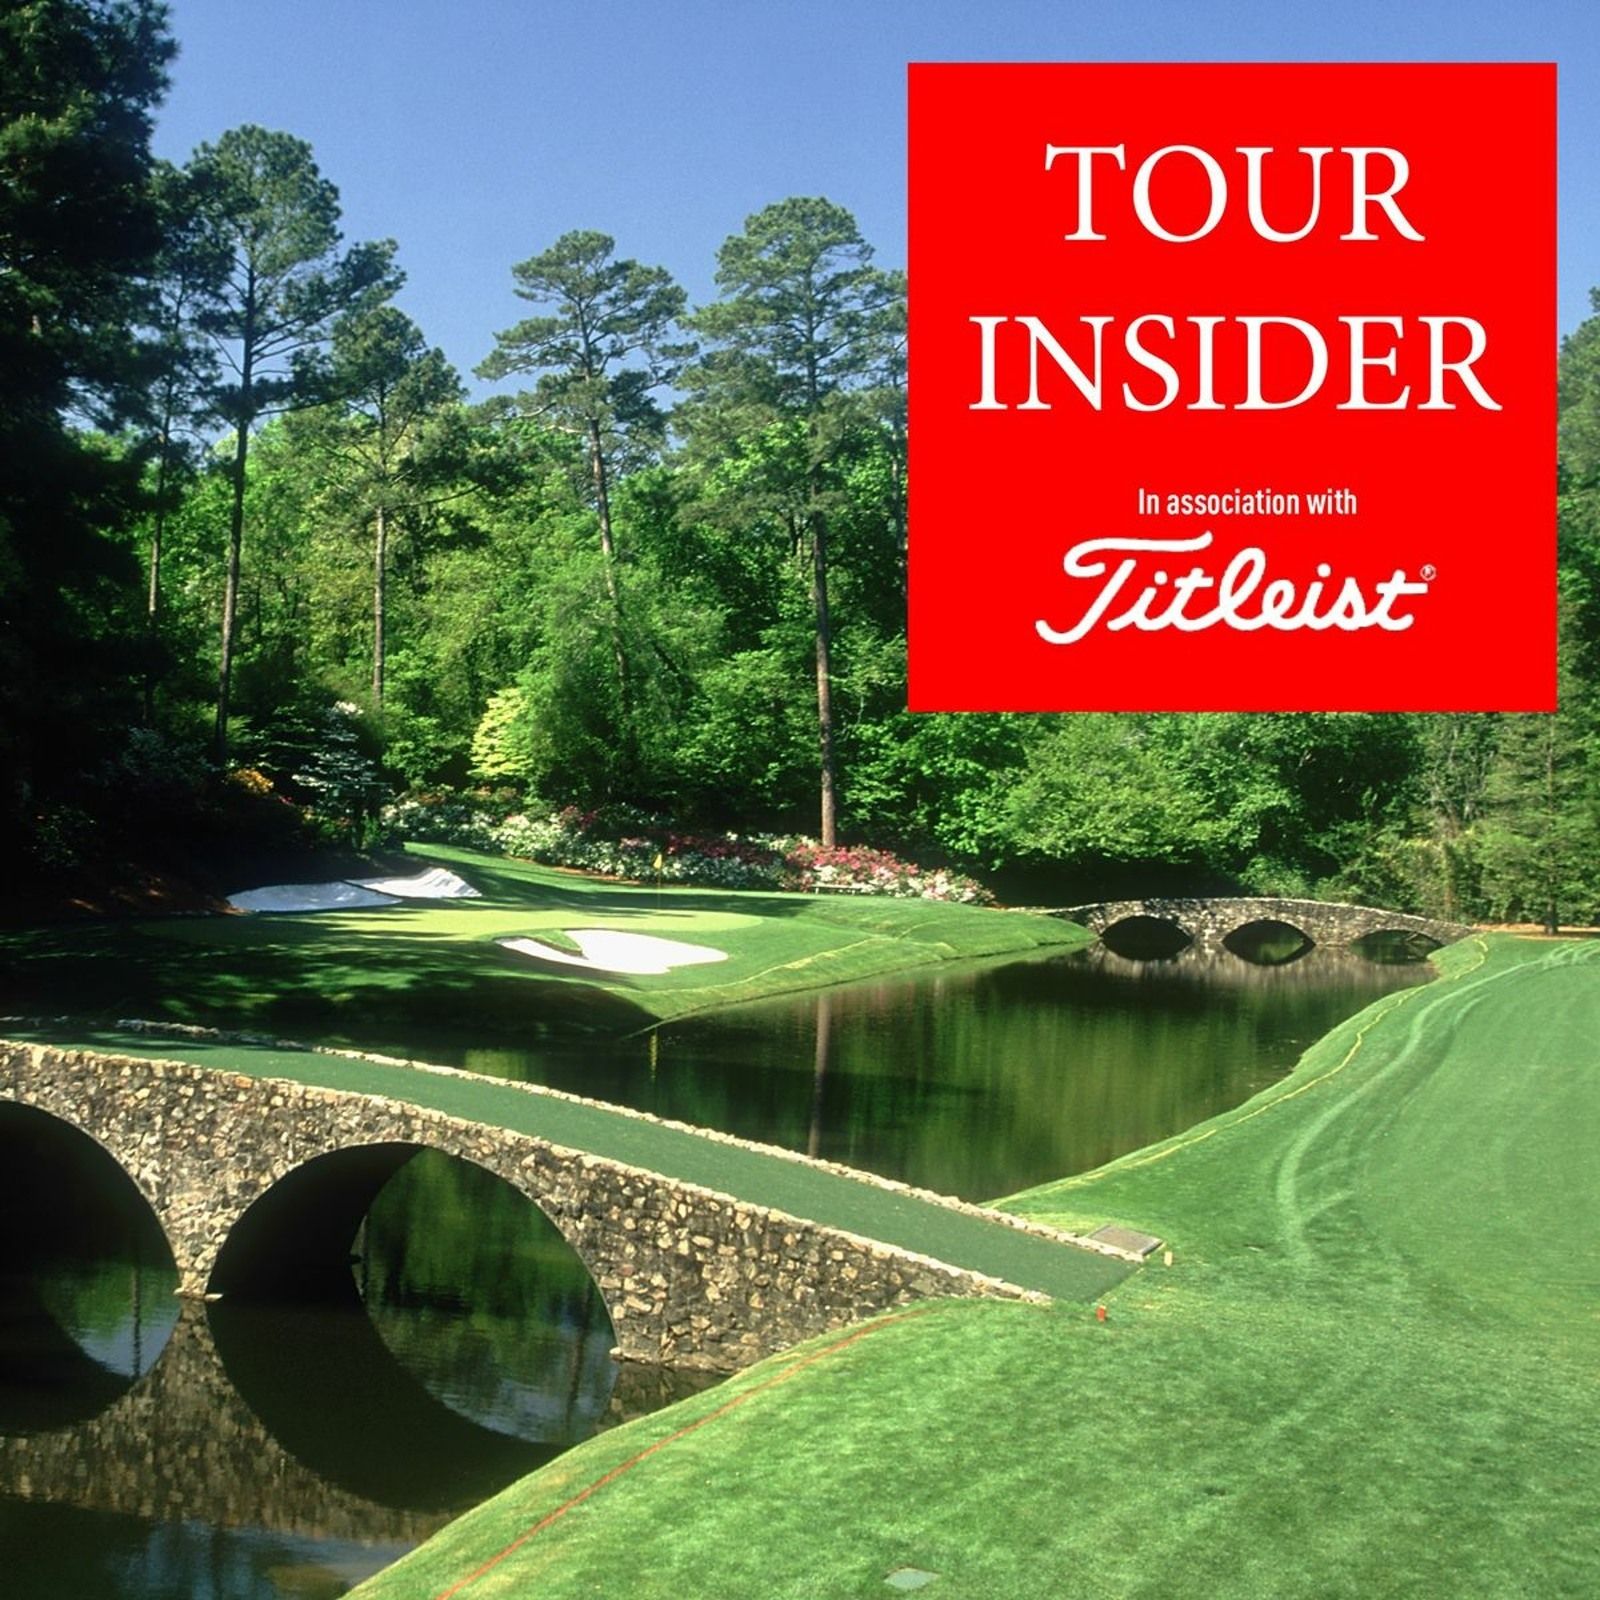 FedEx Cup Playoffs, Women’s Open and the best 18 holes in the world